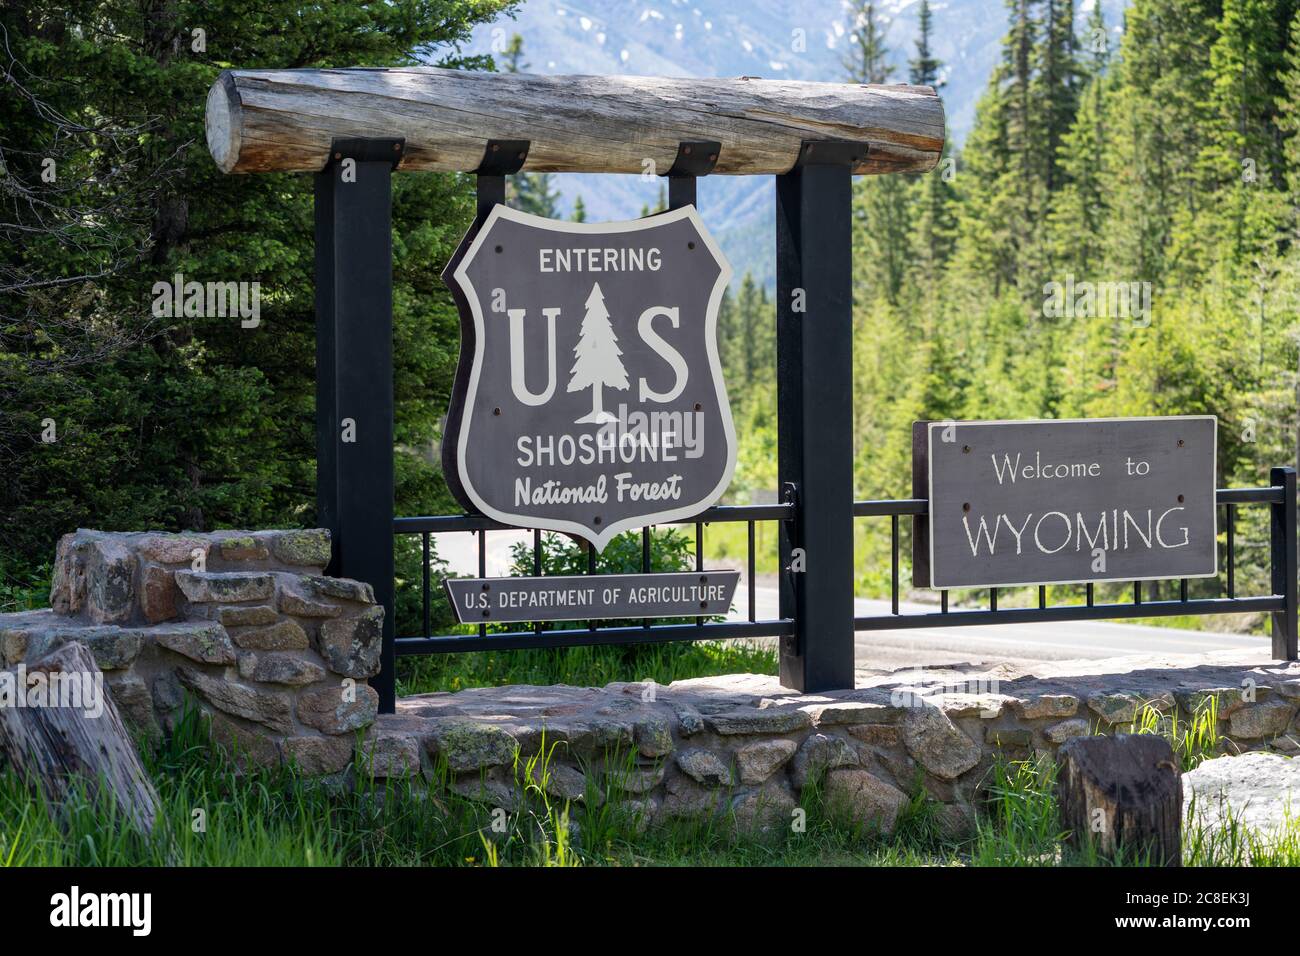 Shoshone National Forest, Wyoming - July 2, 2020: Welcome to Wyoming and the Shoshone National Forest sign along the Beartooth Highway Stock Photo